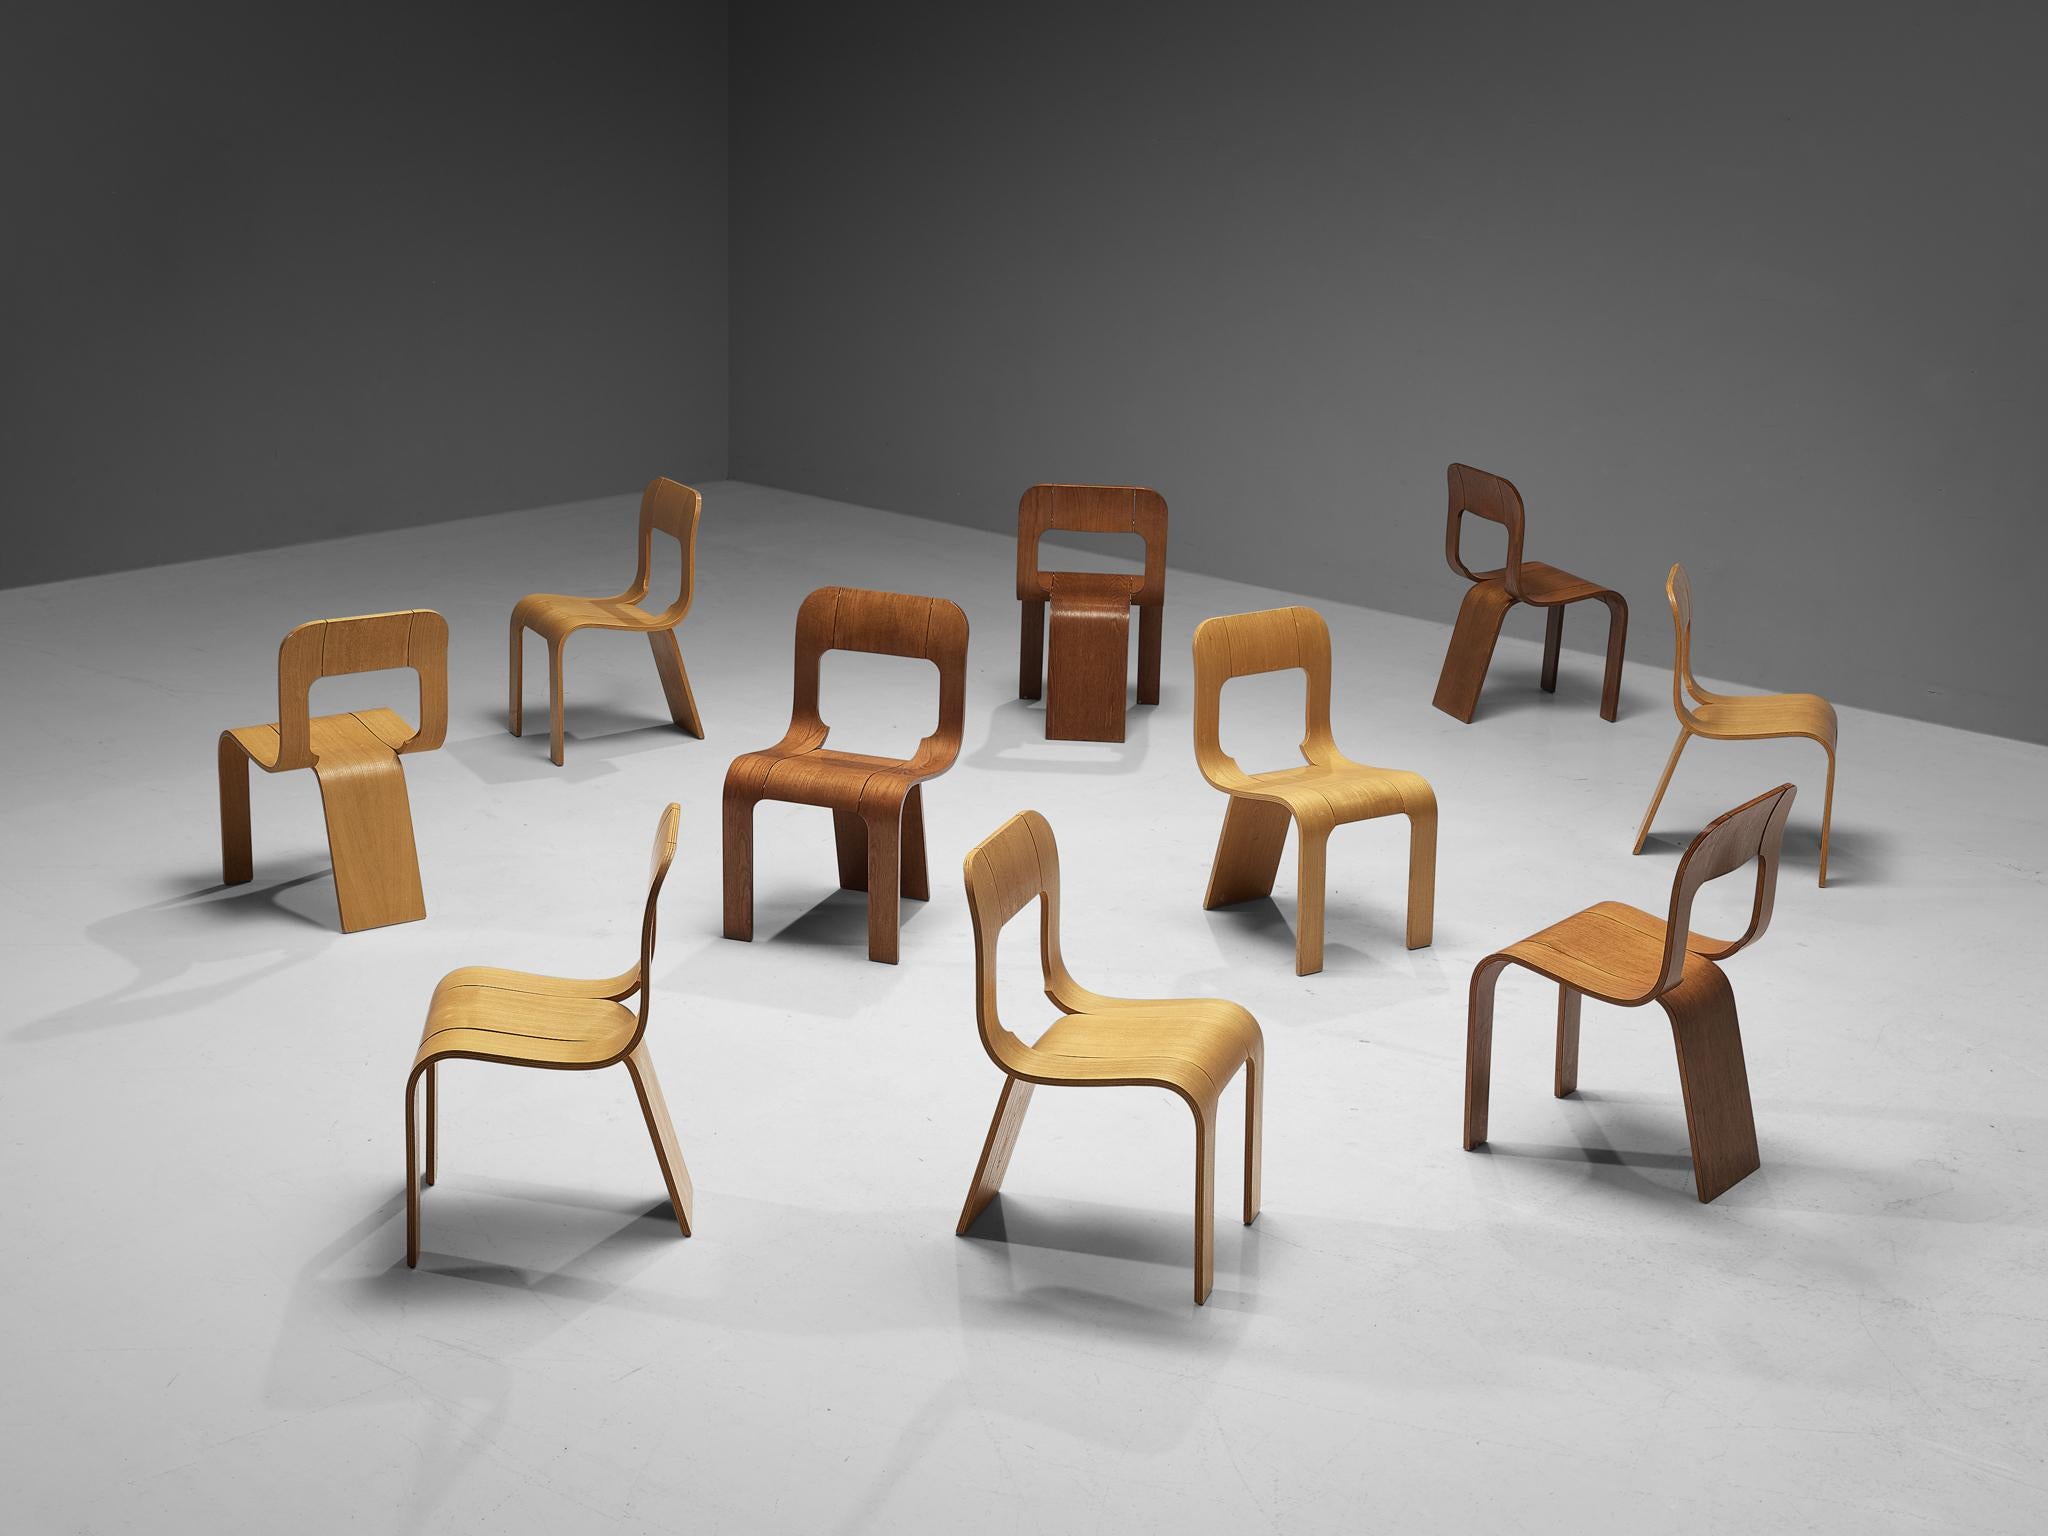 Gigi Sabadin for Stilwood, set of six chairs, plywood, Italy, 1970s.

An inventive design by the Italian Gigi Sabadin, these chairs are made of bent plywood with a veneered finish. The organic design seems to be made out of one piece, which is cut